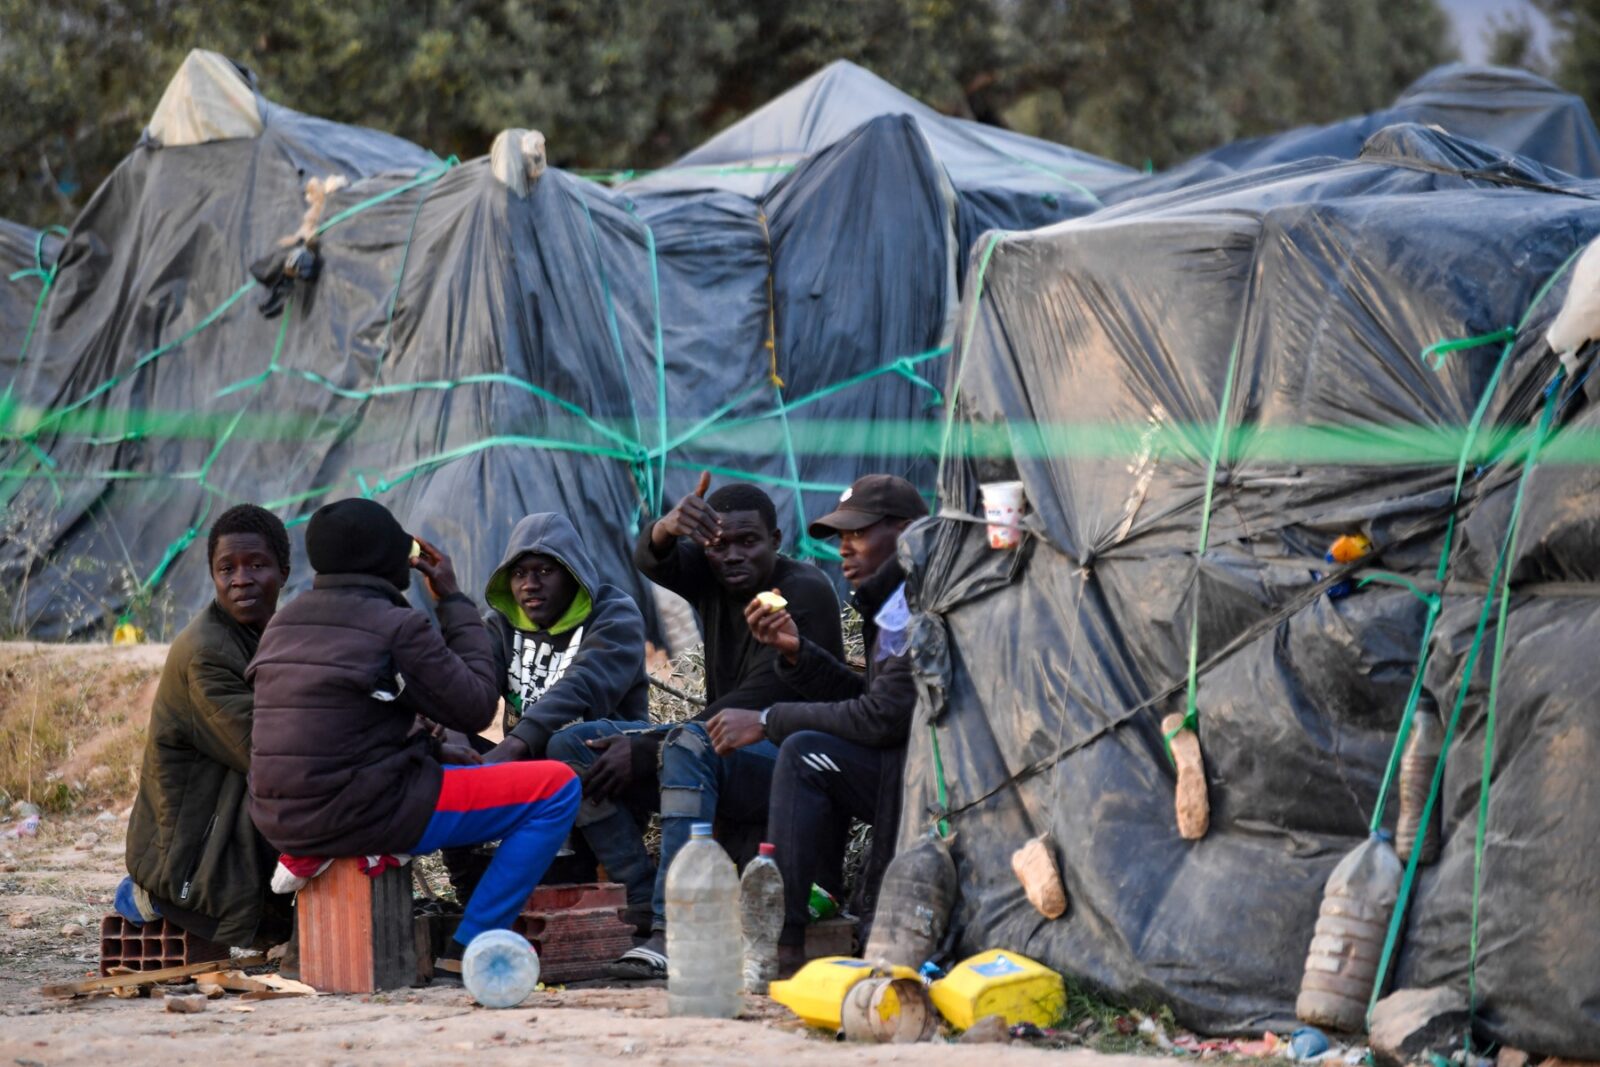 Migrants from sub-Saharan Africa sit next to makeshift shelters at a camp al-Amra on the outskirts of the Tunisian port city of Sfax on April 23, 2024. After President Kais Saied said in a speech last year that "hordes of illegal migrants" posed a demographic threat to Tunisia, anti-migrant violence broke out and hundreds of sub-Saharan Africans were kicked out of their jobs and homes.,Image: 867348527, License: Rights-managed, Restrictions: TO GO WITH: Tunisia-migration-rights FOCUS by Francoise KADRI, Model Release: no, Credit line: Fethi Belaid / AFP / Profimedia